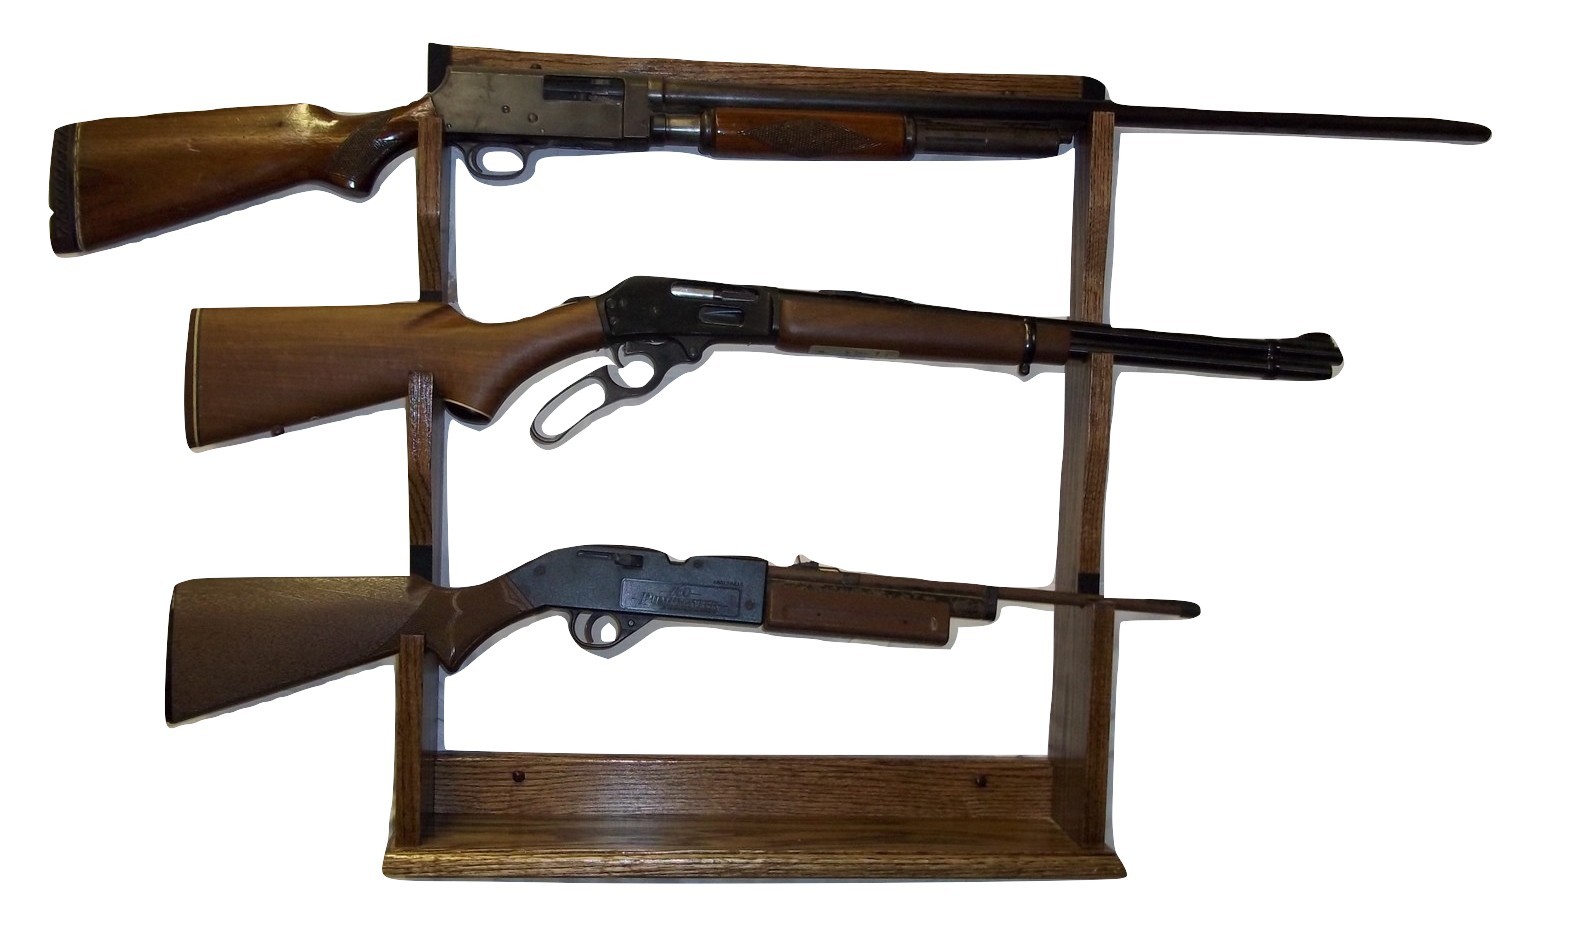 Primary image for 3 Gun Rack for Mantle, Trade Show or Wall - Walnut Finish